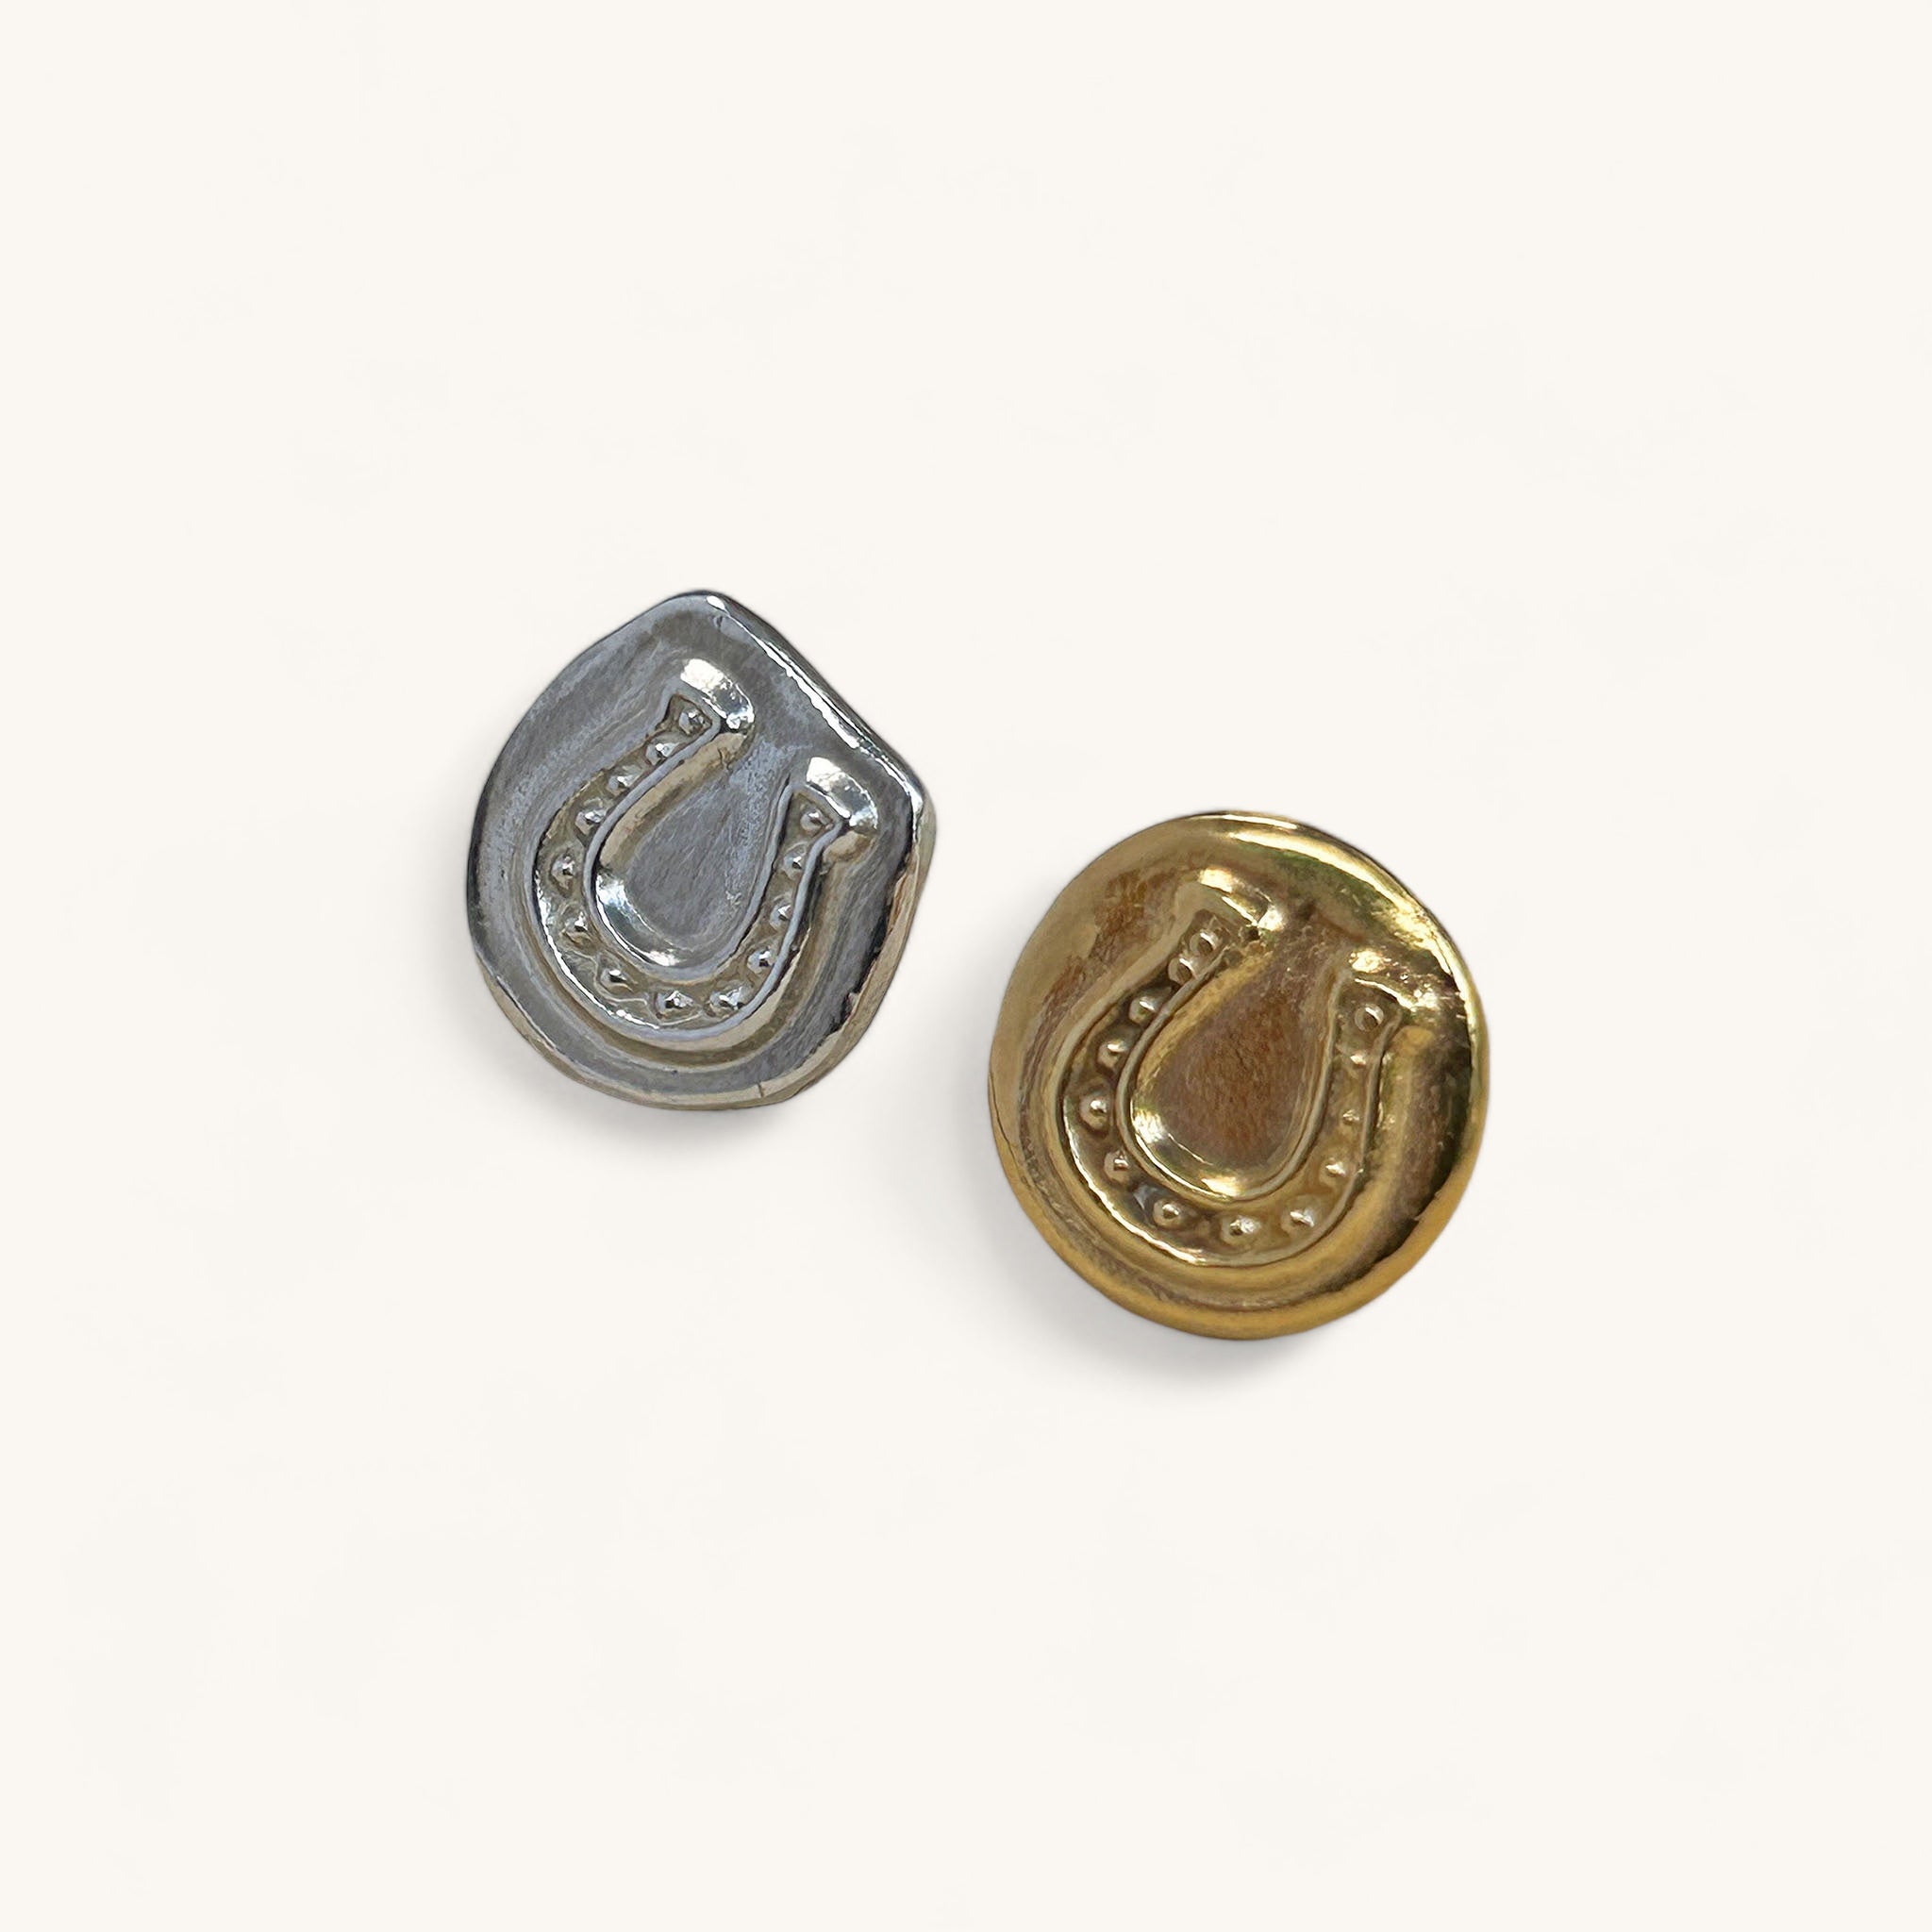 Jennifer Loiselle horseshoe earrings in recycled silver and gold